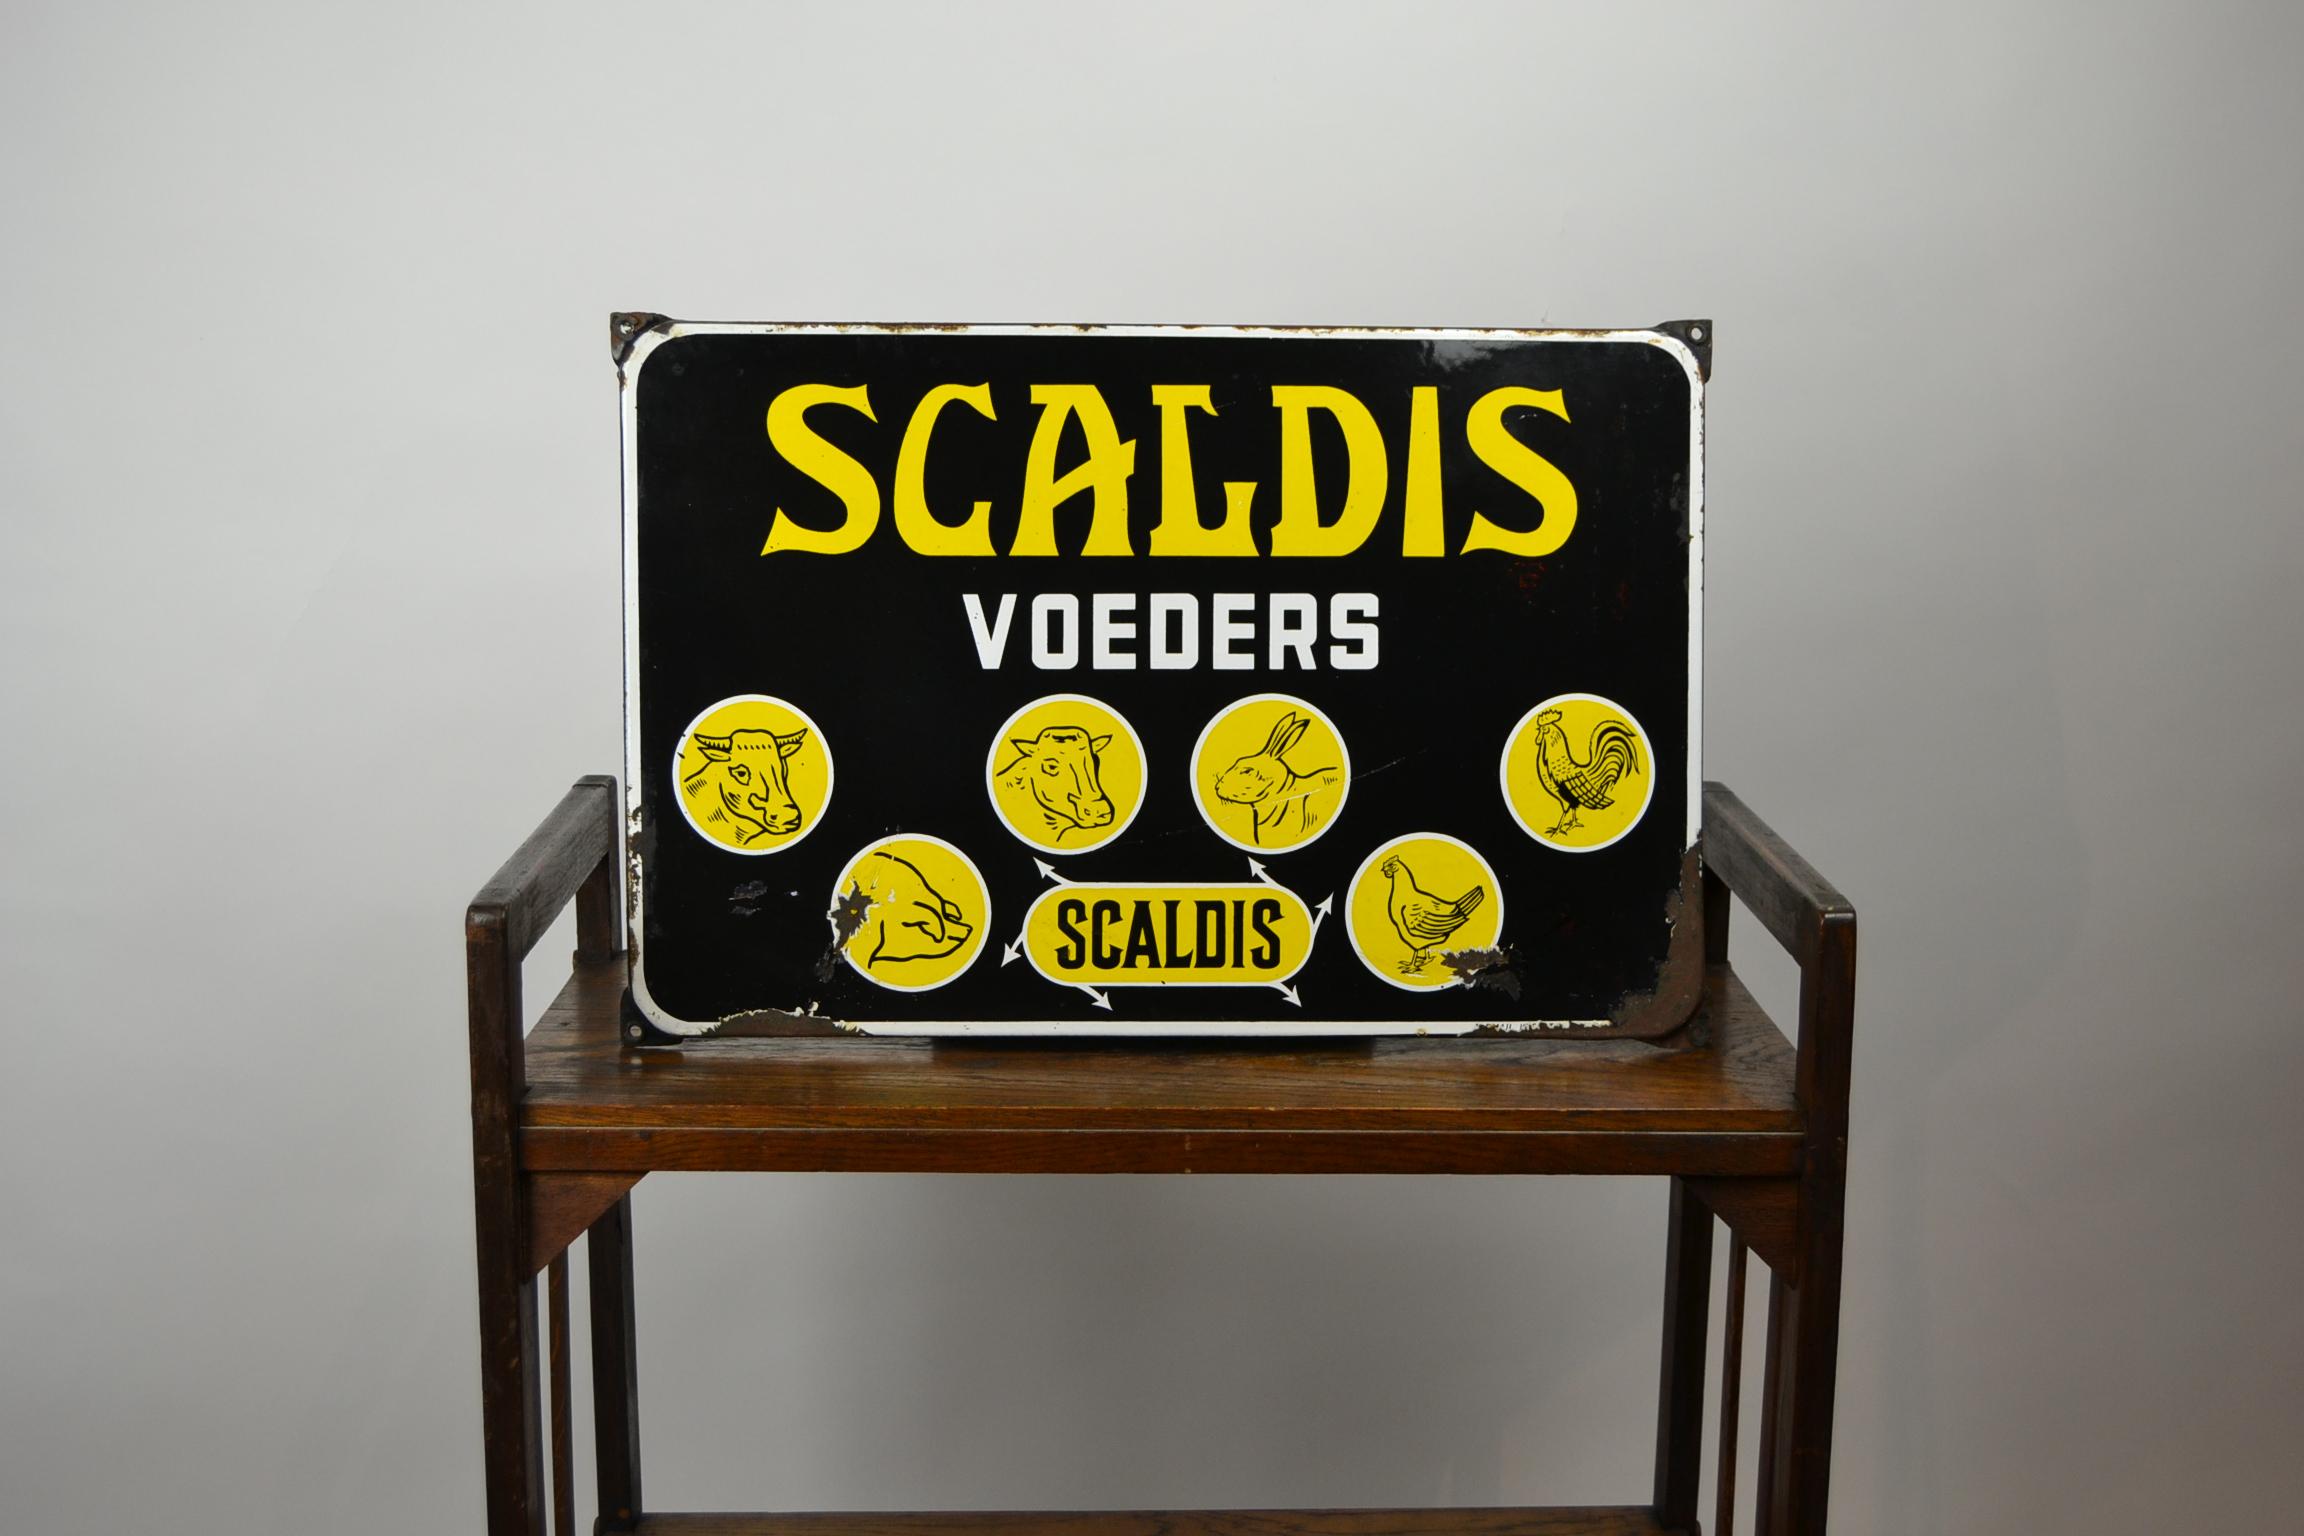 Vintage enamel sign - Porcelain sign - Display sign - Wall sign
for Animal Nutrition by Scaldis Belgium.
Made by Email. Koek, 1958 Bruxelles - Belgium.
Images from a cow, pig, rabbit, bull, cock and hen.
Colors black, white and yellow.
The Sign